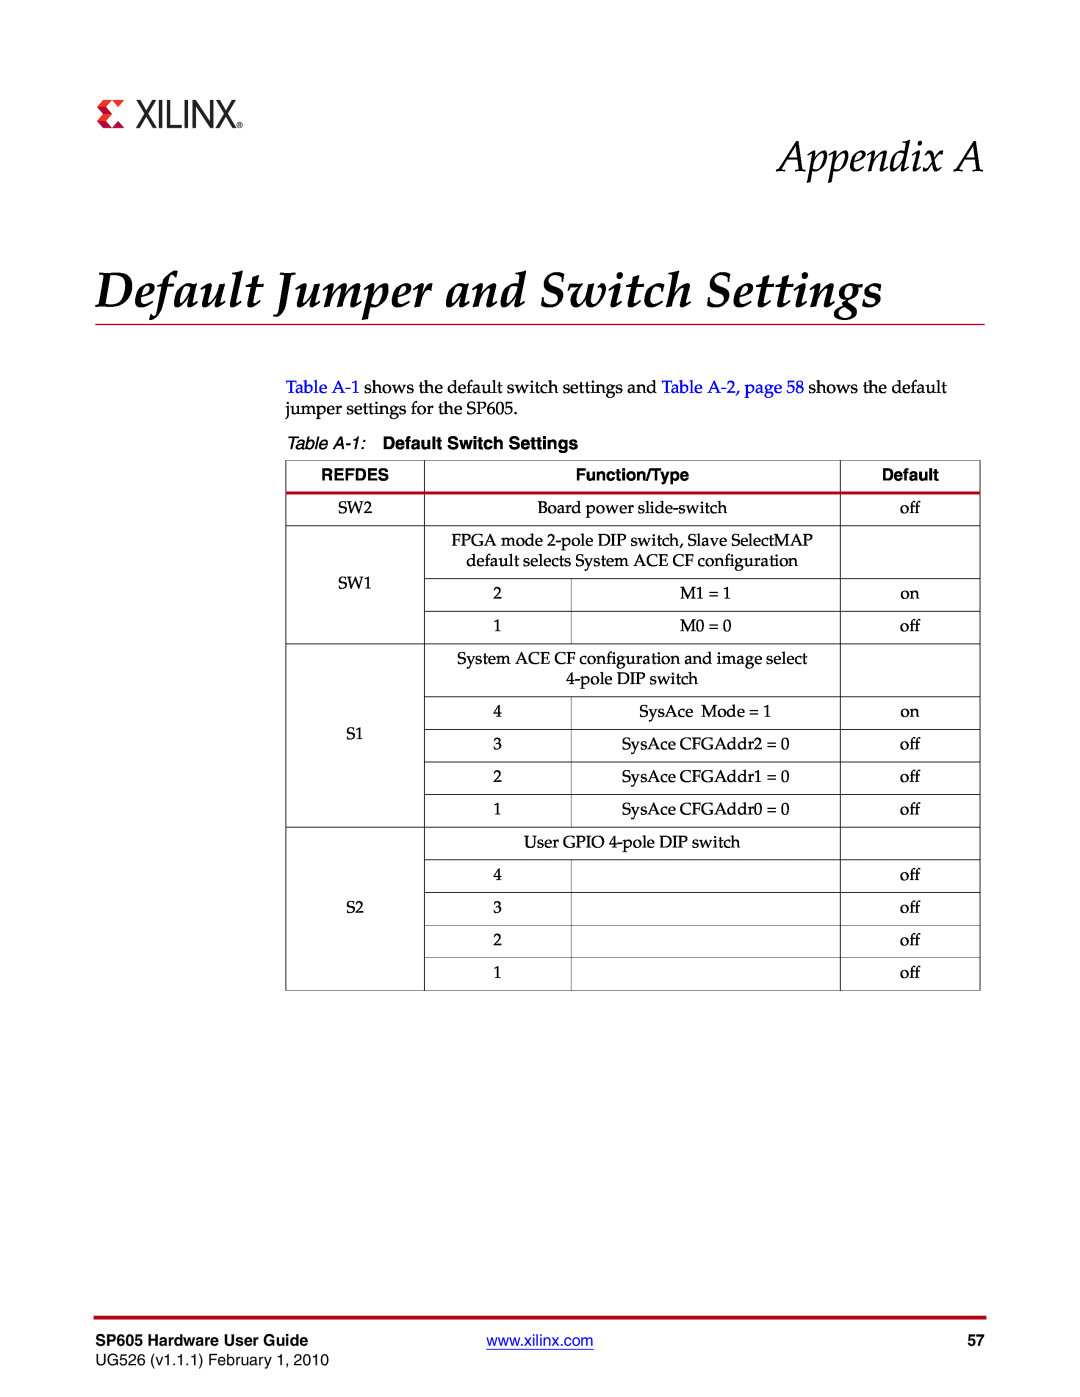 Xilinx SP605 Default Jumper and Switch Settings, Appendix A, Table A-1 Default Switch Settings, Refdes, Function/Type 